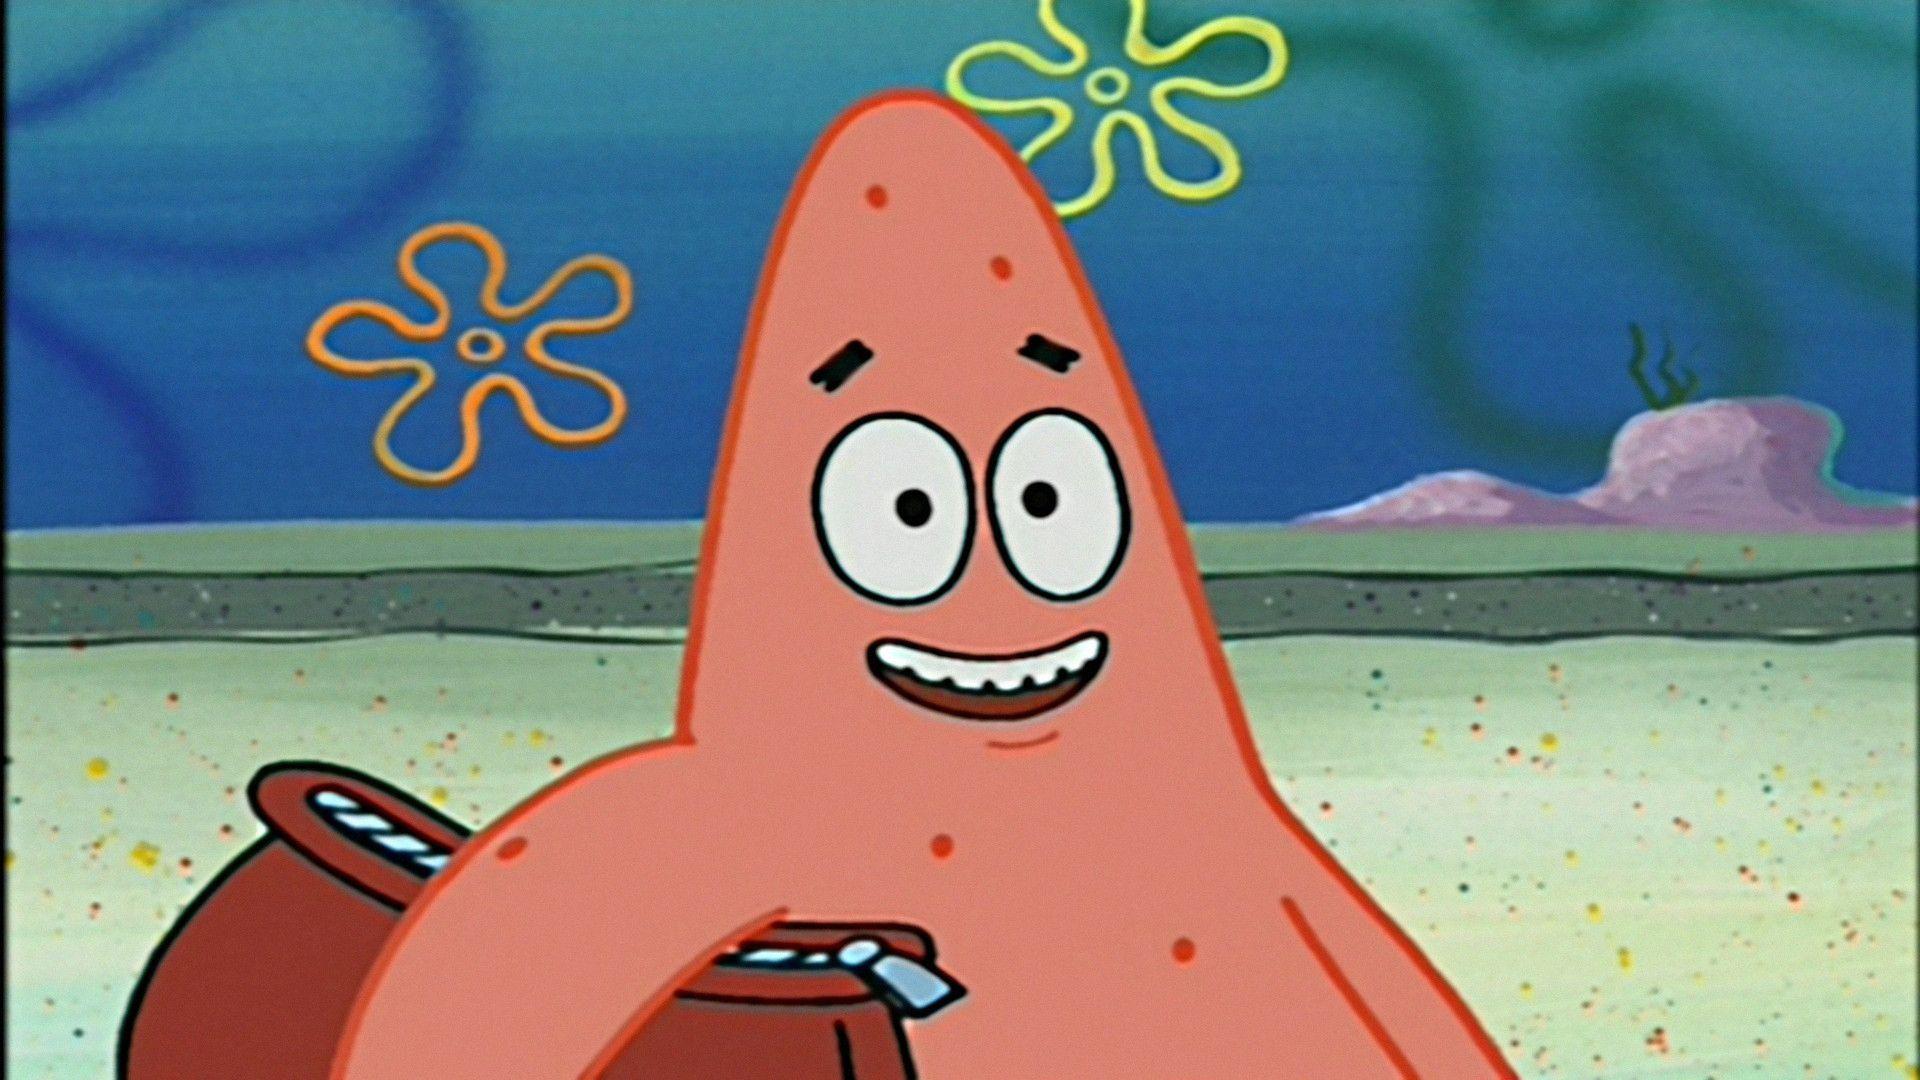 Image For > Funny Patrick Star Wallpapers